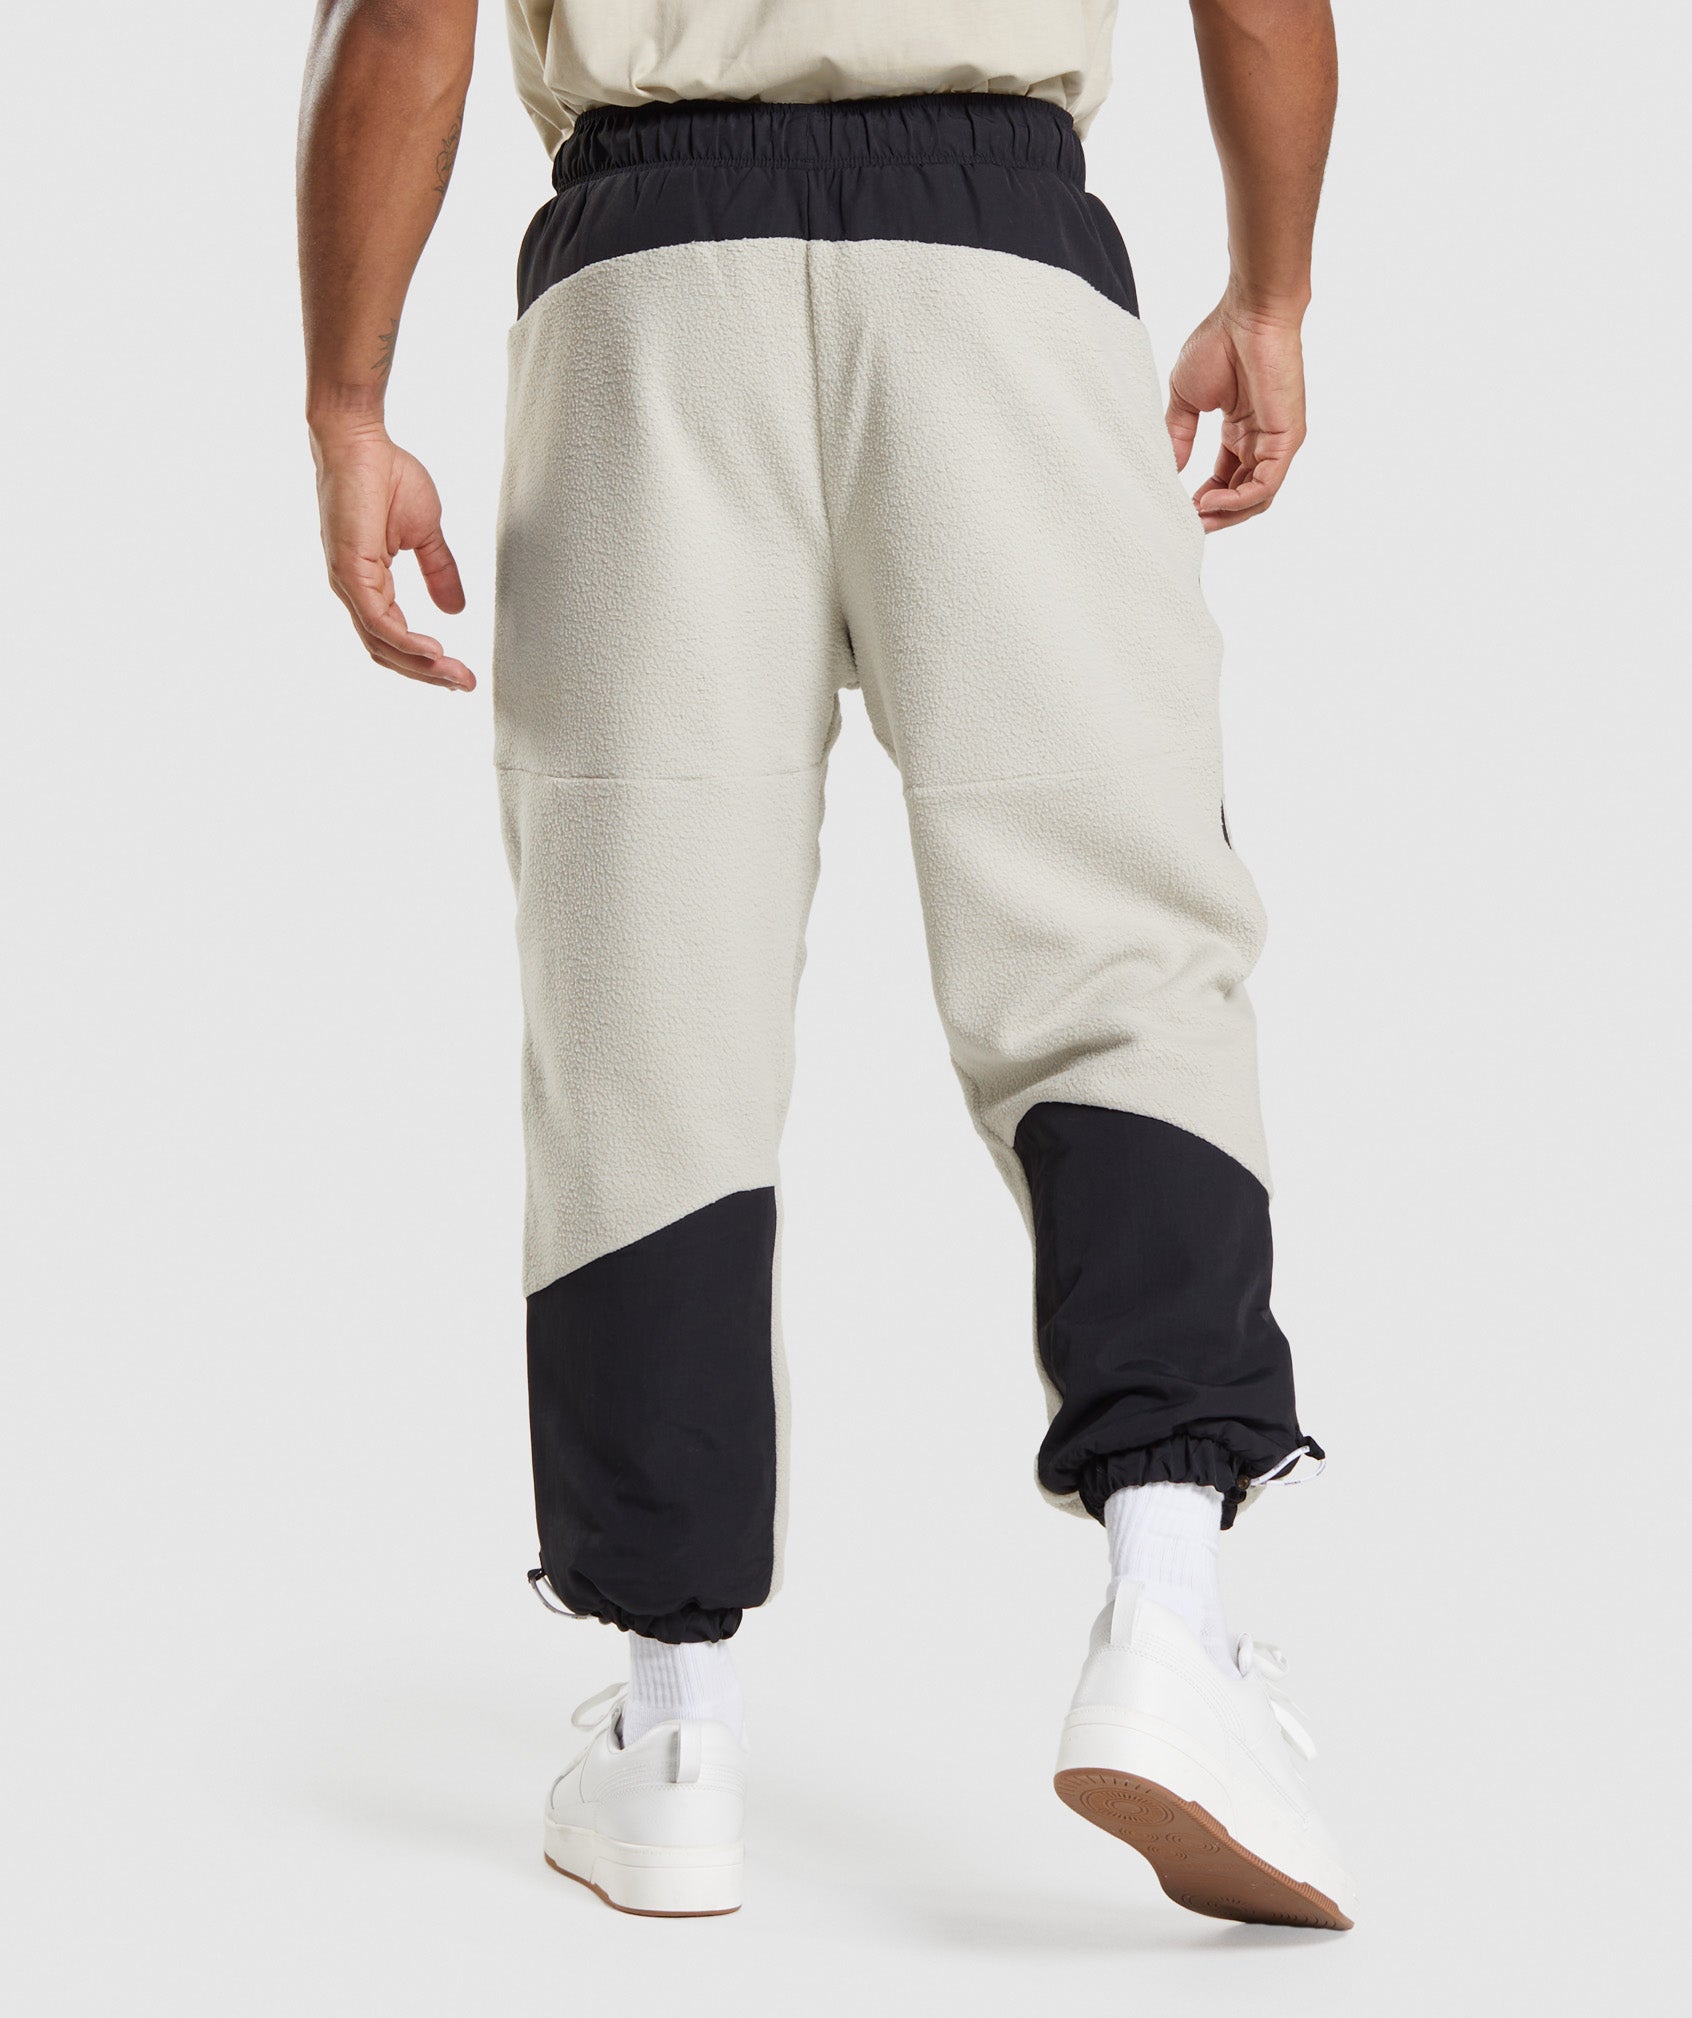 Vibes Joggers in Pebble Grey/Black - view 2